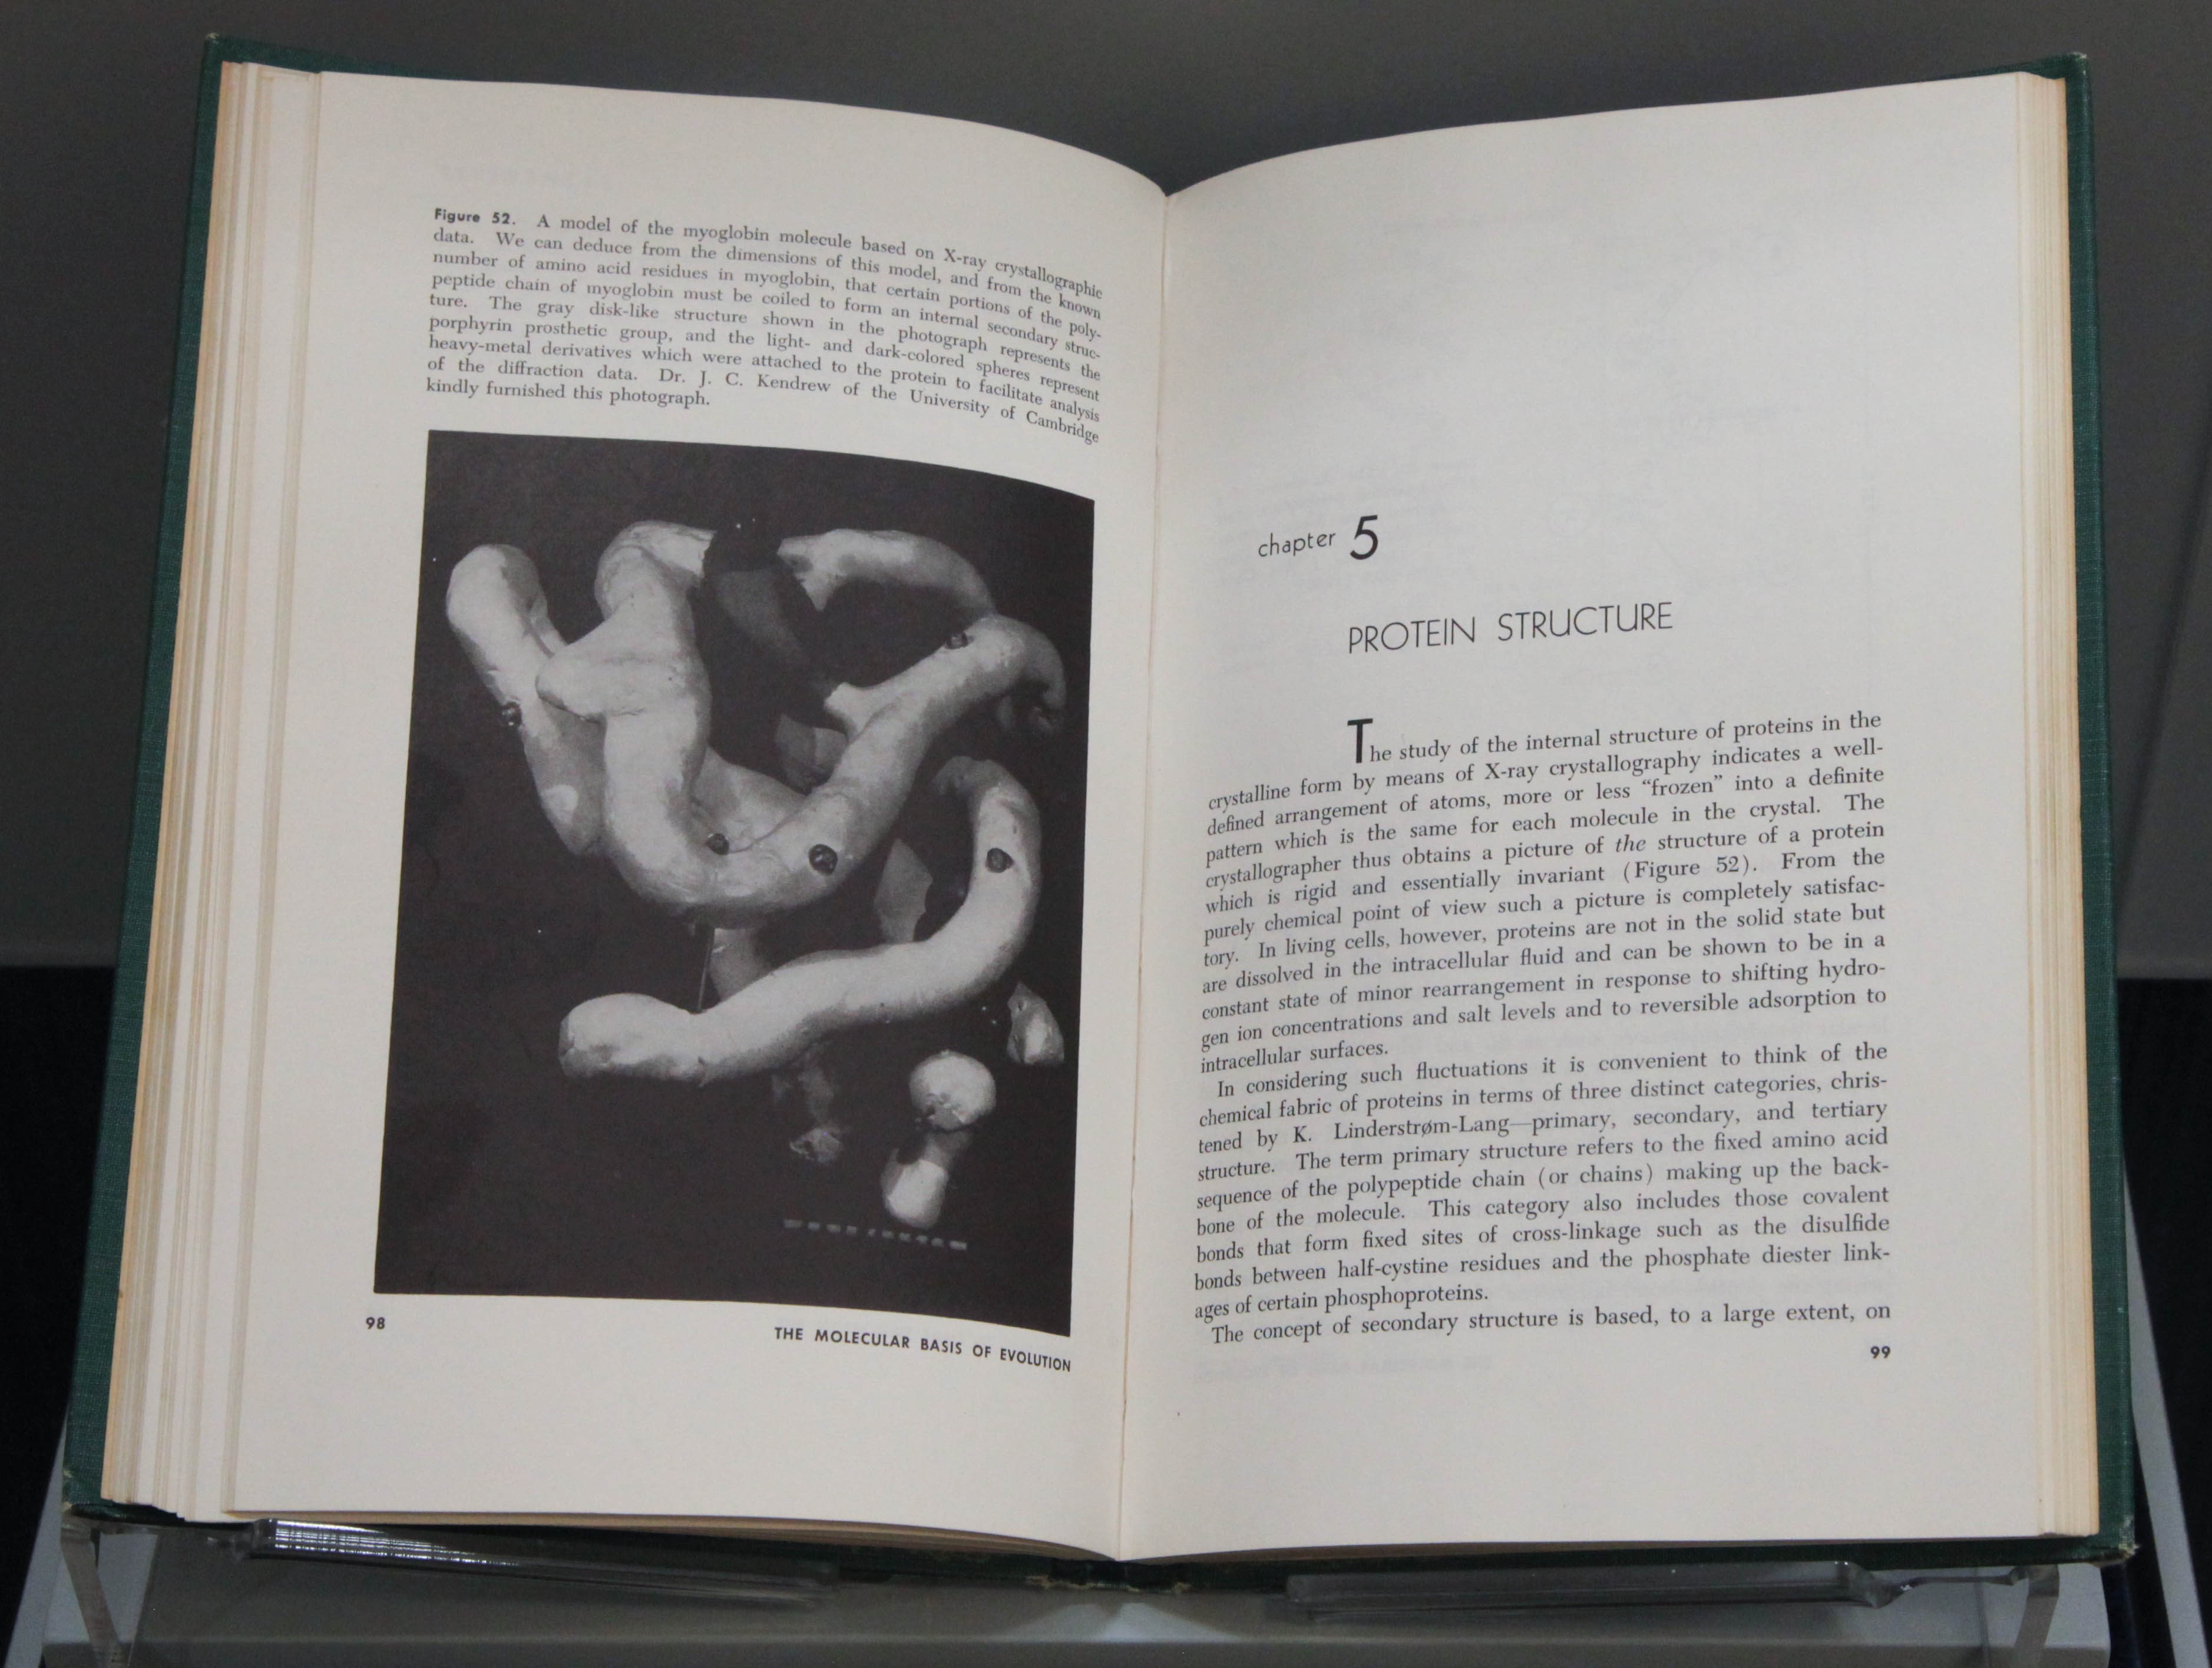 image of open book with molecular sculpture image